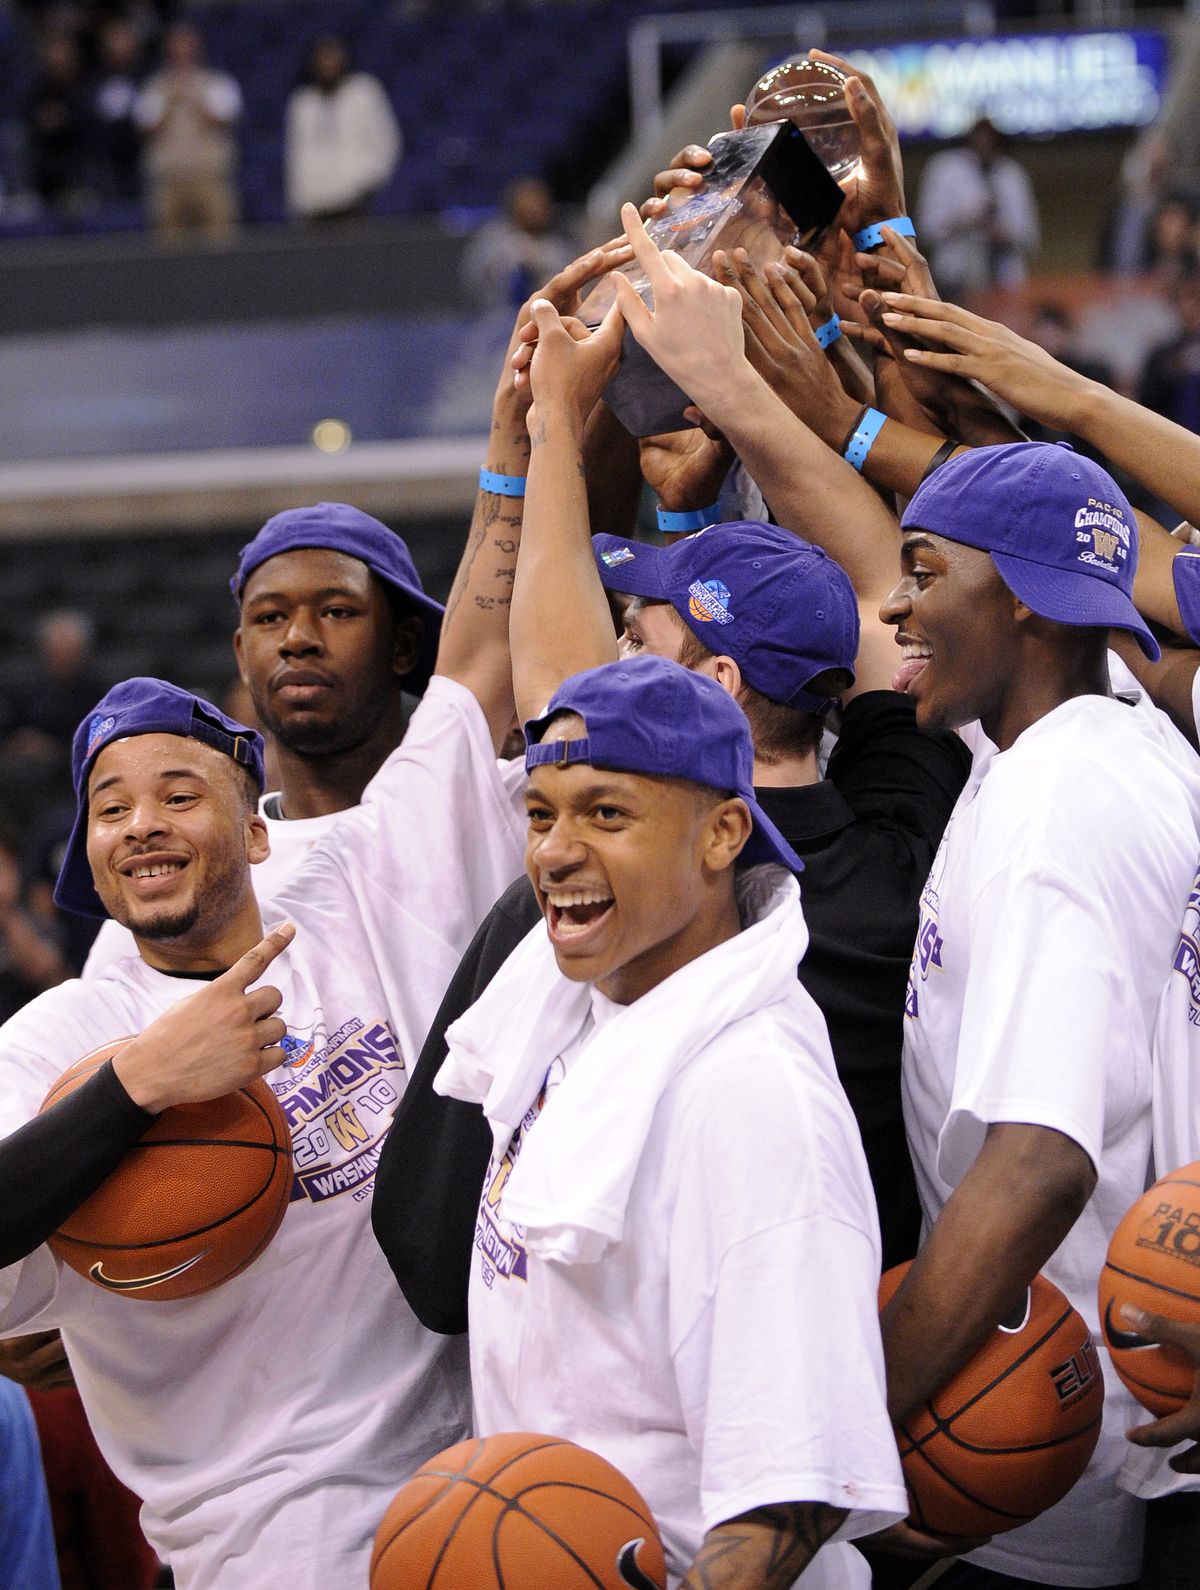 The Huskies hoist the trophy for winning the Pac-10 tournament. (Associated Press)